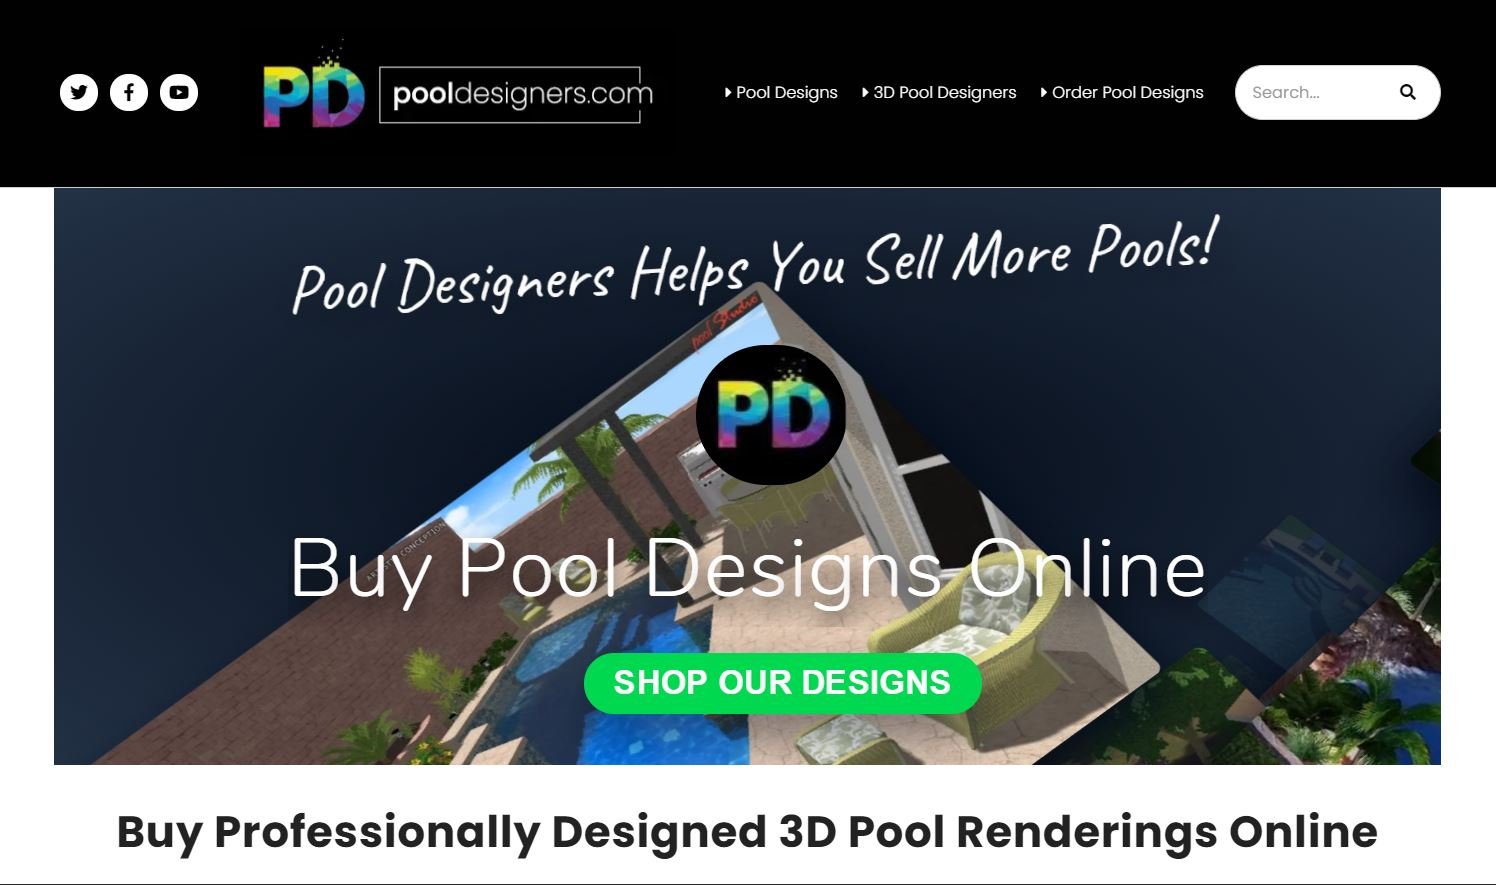 View 3D Pool Designs from professional Pool Designers